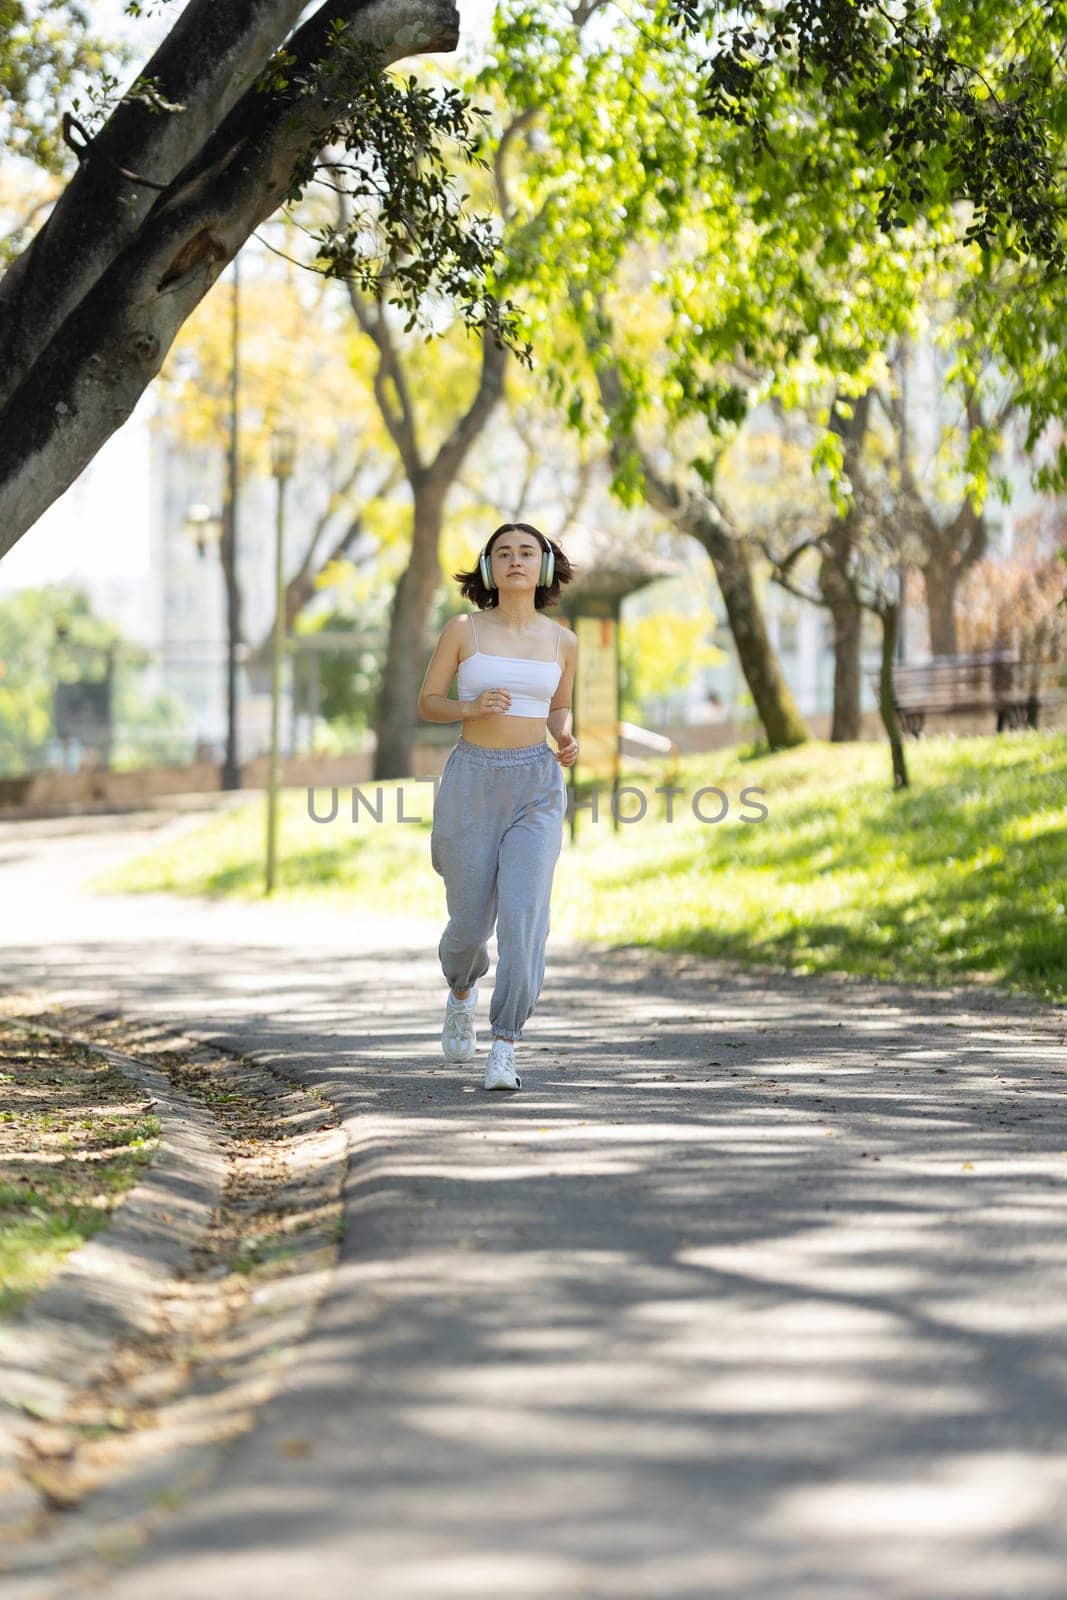 A woman is running on a path in a park. She is wearing headphones and a white tank top